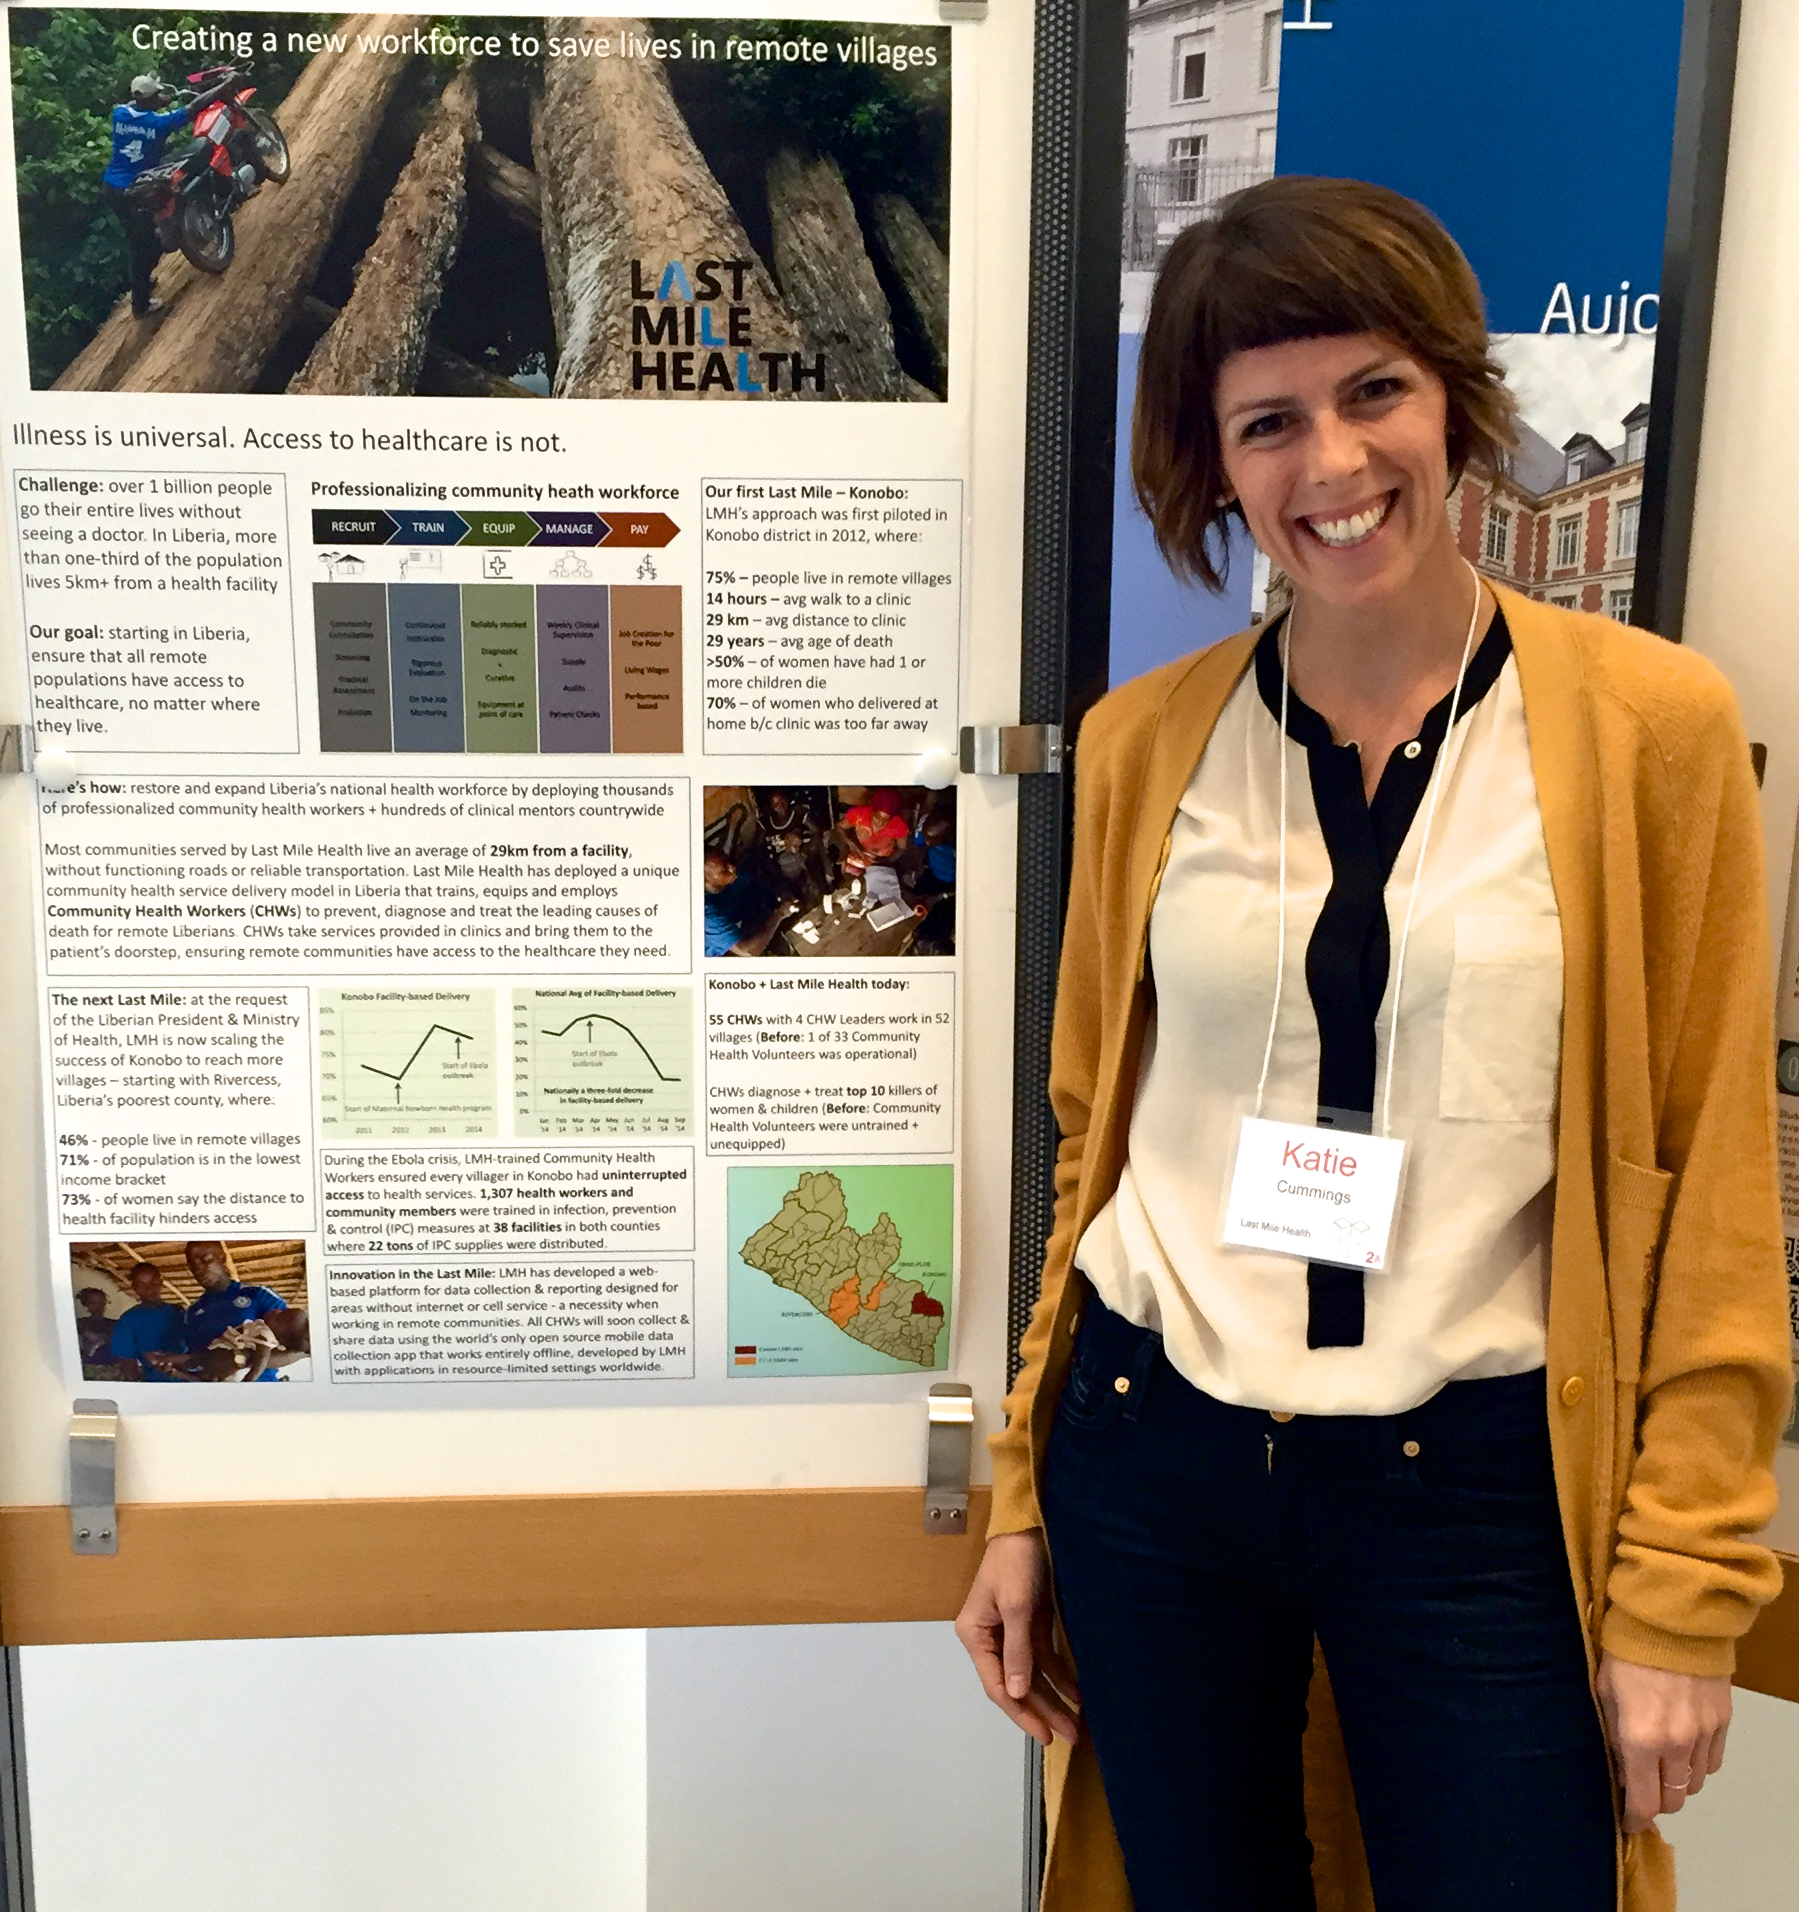 Sage Scholar Katie Cummings, from Last Mile Health, is shown with her poster at the Paris Sage Assembly, April 18, 2015.